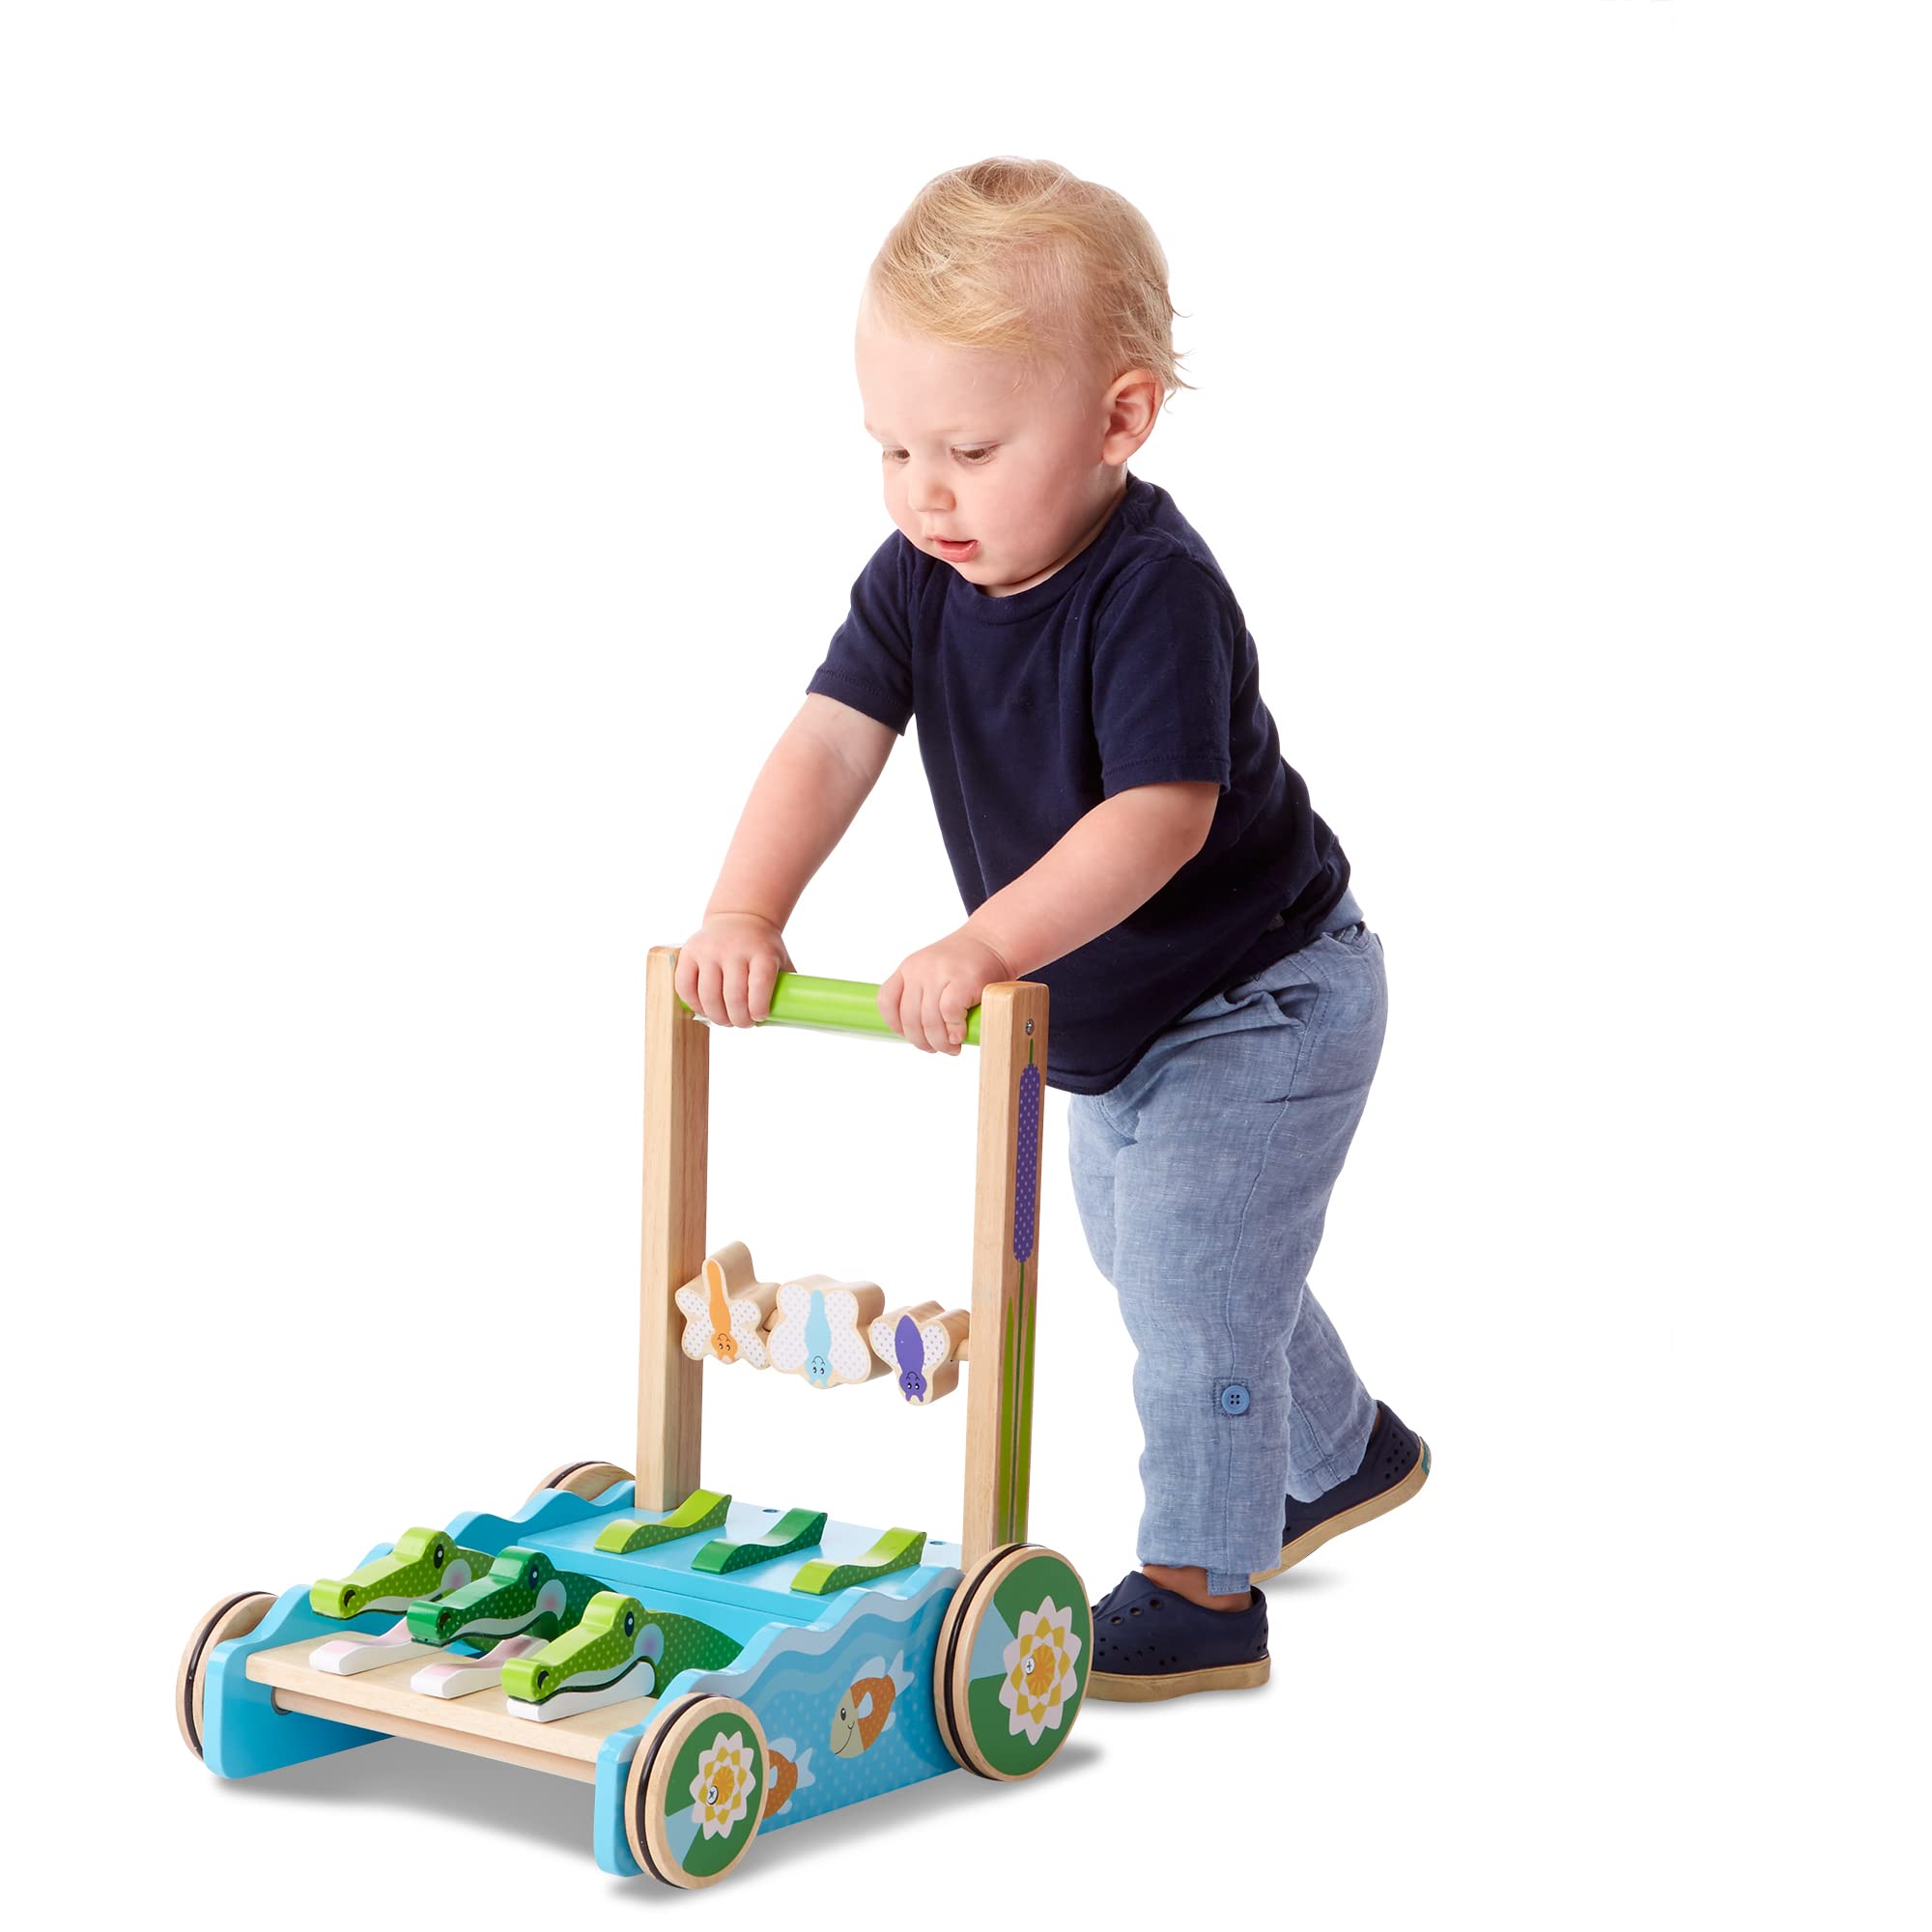 Melissa & Doug First Play Chomp and Clack Alligator Wooden Push Toy and Activity Walker - Pretend Play Developmental Baby Push Walker Toy For Toddlers Ages 1+, 1 EA